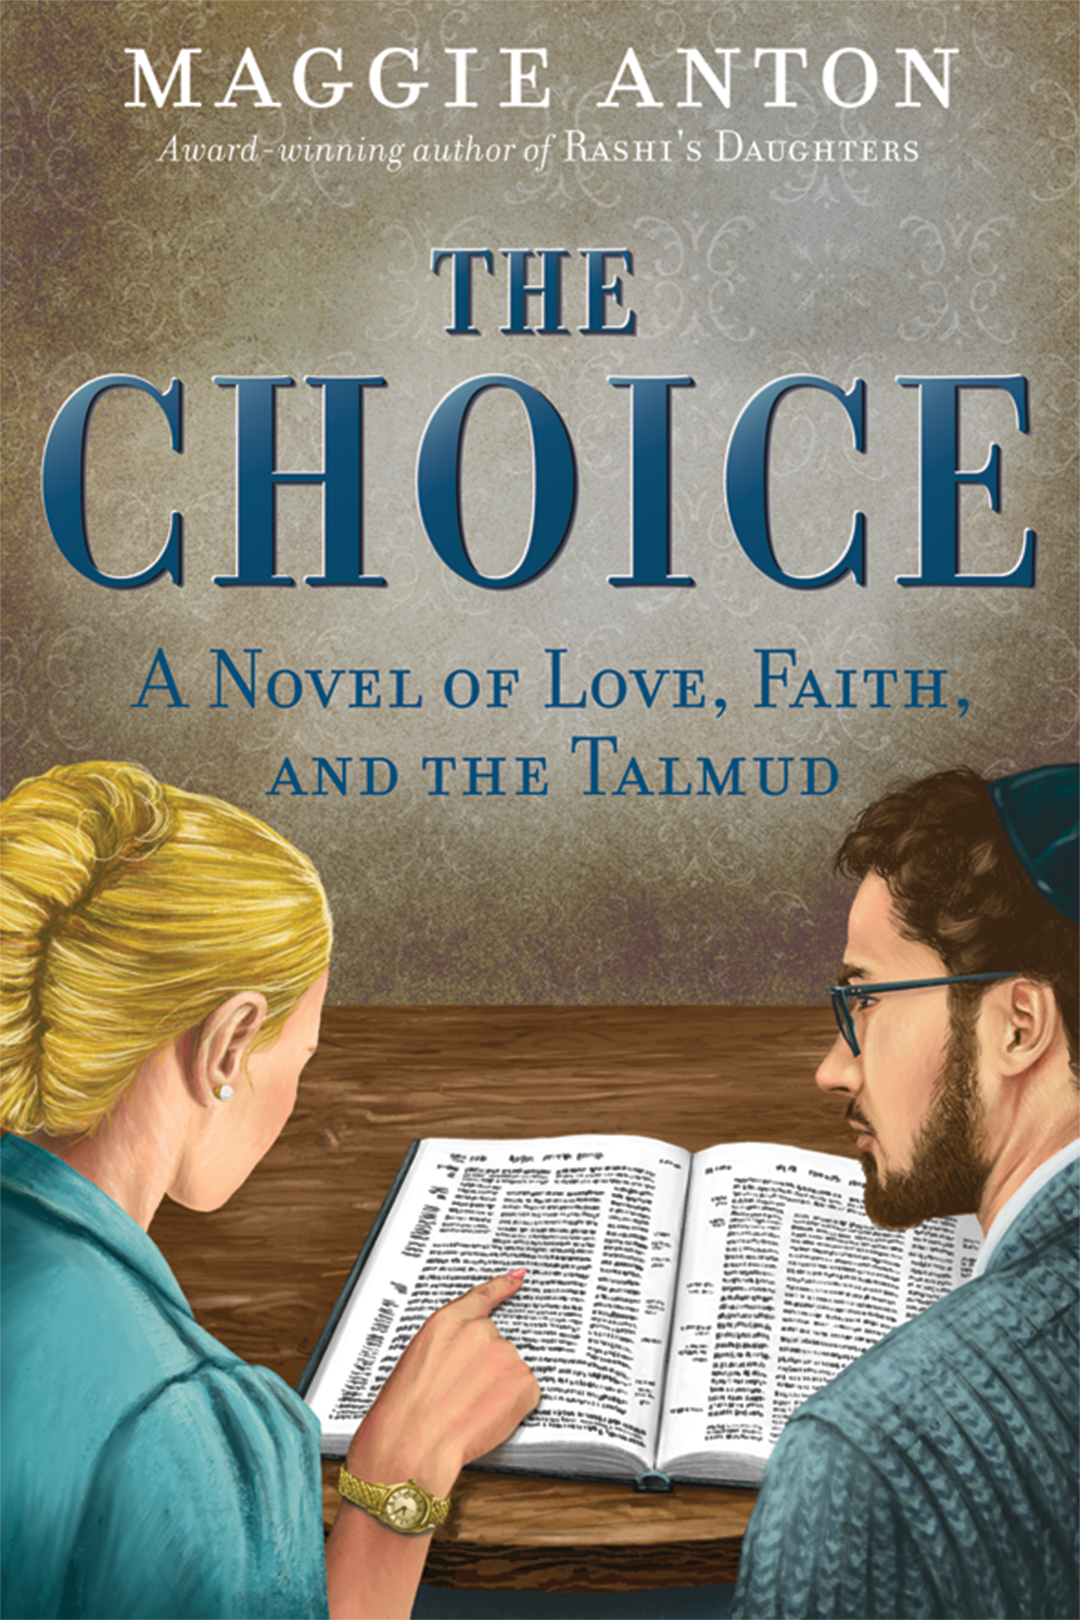 Book cover of The Choice, a novel by Maggie Anton